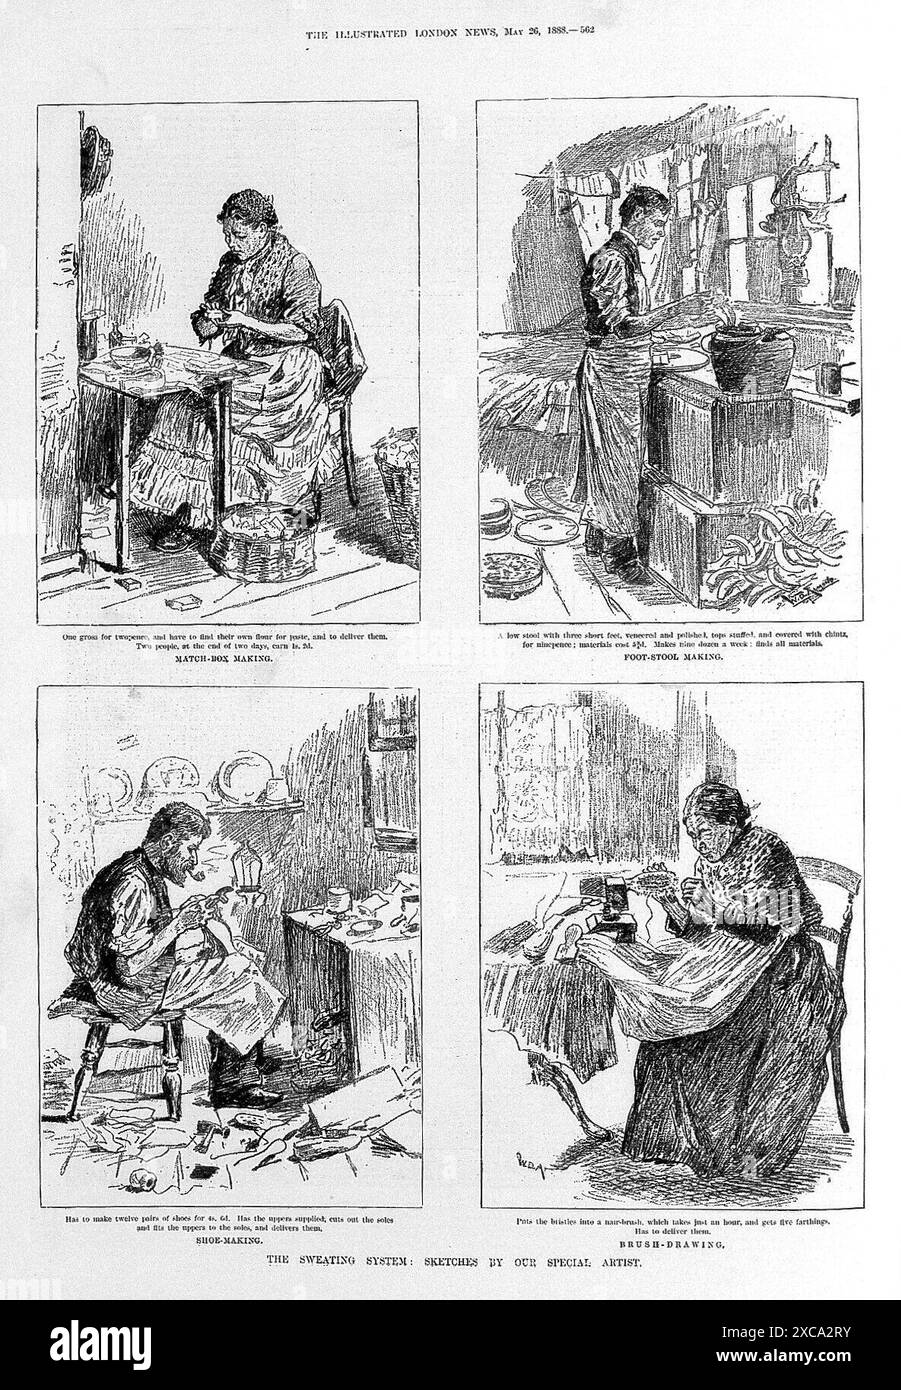 A series of four pen and ink drawings from the Illustrated London News, 1888, depicting women working in various industries. The images showcase a woman sewing, a woman preparing food, a woman making hats, and a woman working on a sewing machine. These illustrations offer a glimpse into the lives of working women in Victorian London. Stock Photo